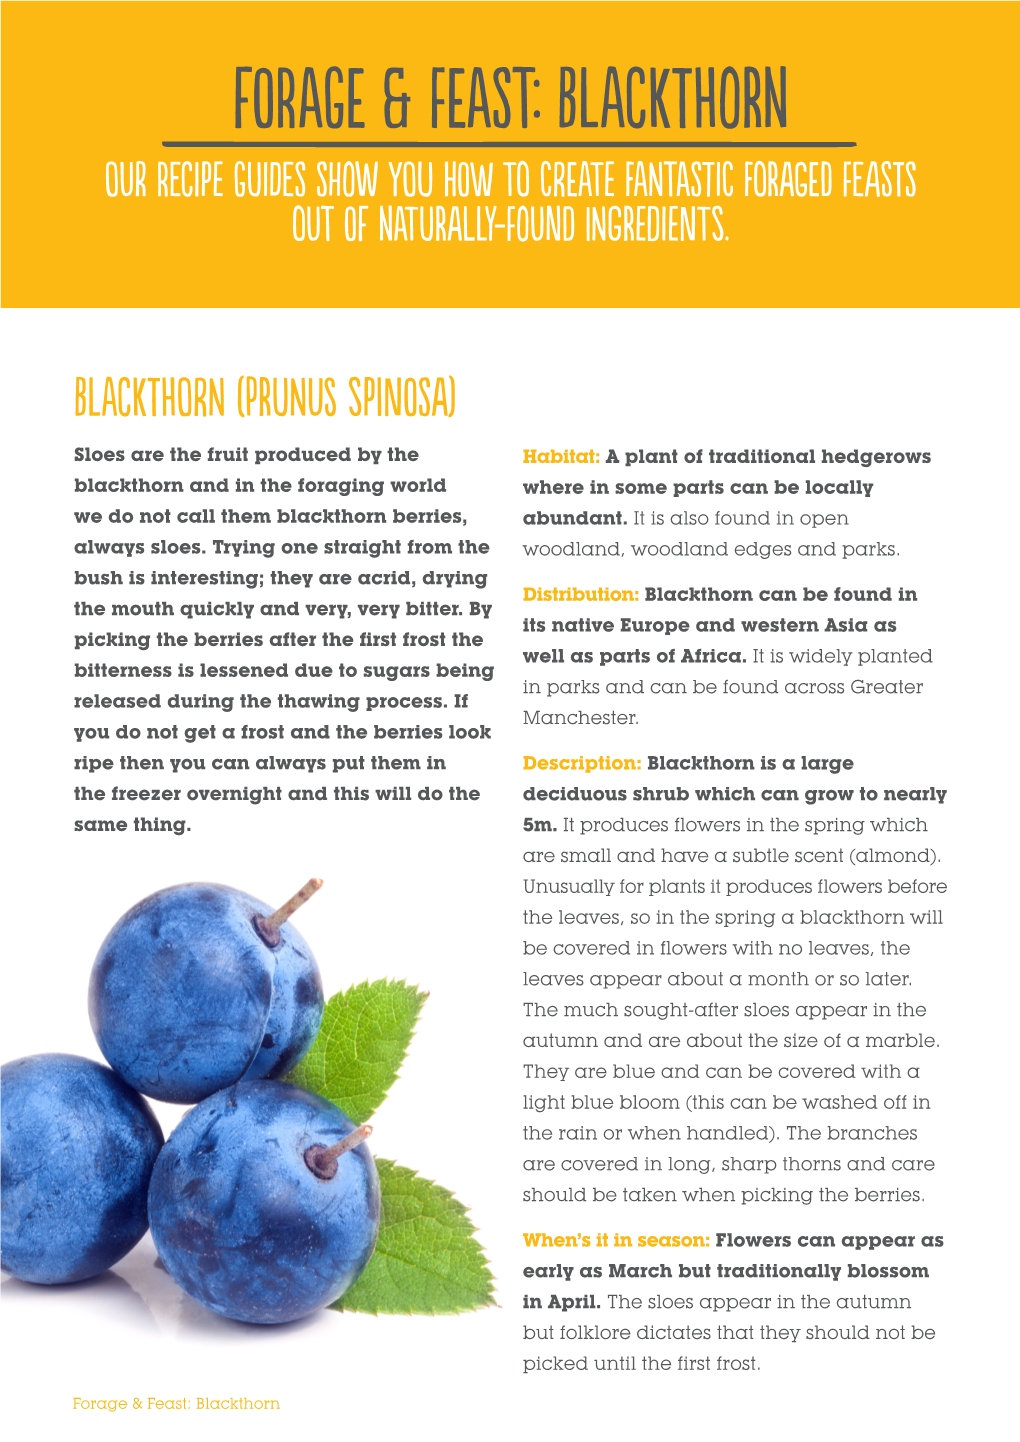 Blackthorn I Our Recipe Guides Show You How to Create Fantastic Foraged Feasts out of Naturally-Found Ingredients